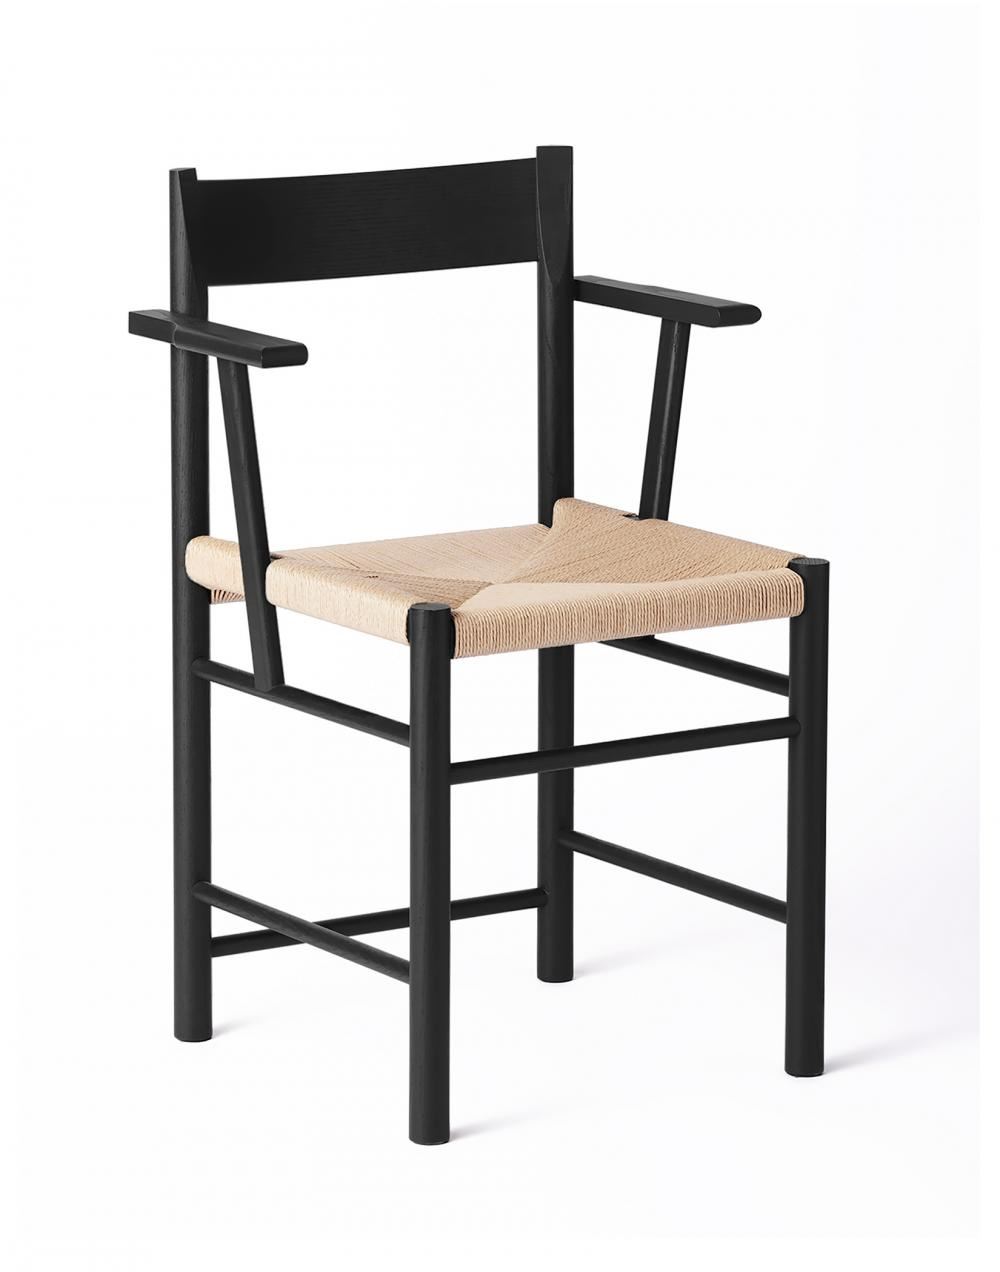 F Dining Chair Black Painted Ash Natural Paper Cord Weaved Seat Without Armrest